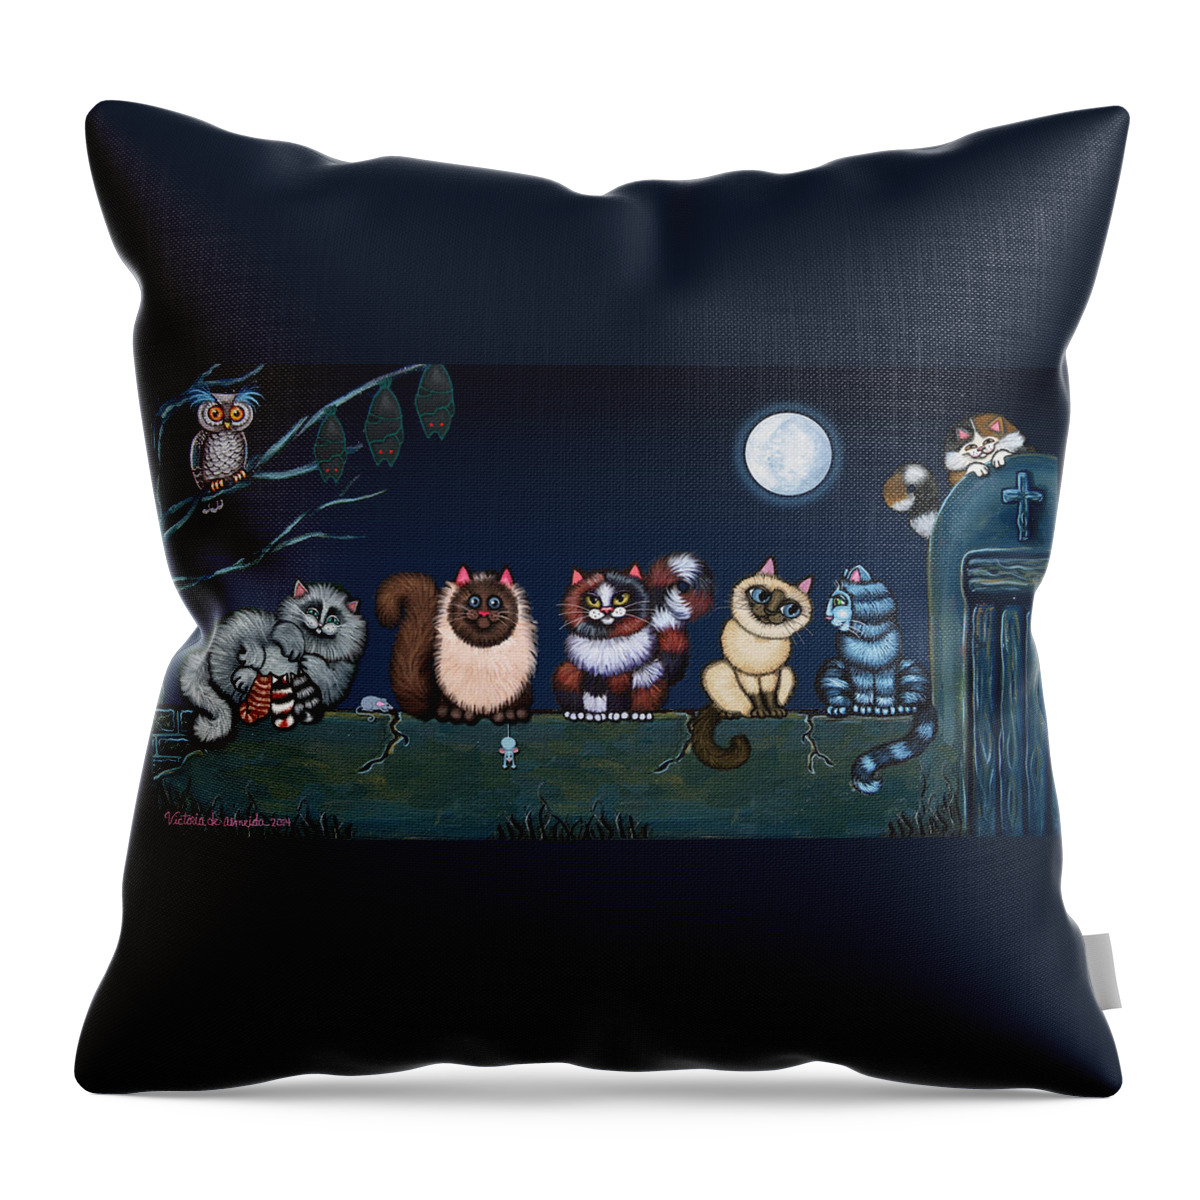 Cat Throw Pillow featuring the painting Moonlight On The Wall by Victoria De Almeida